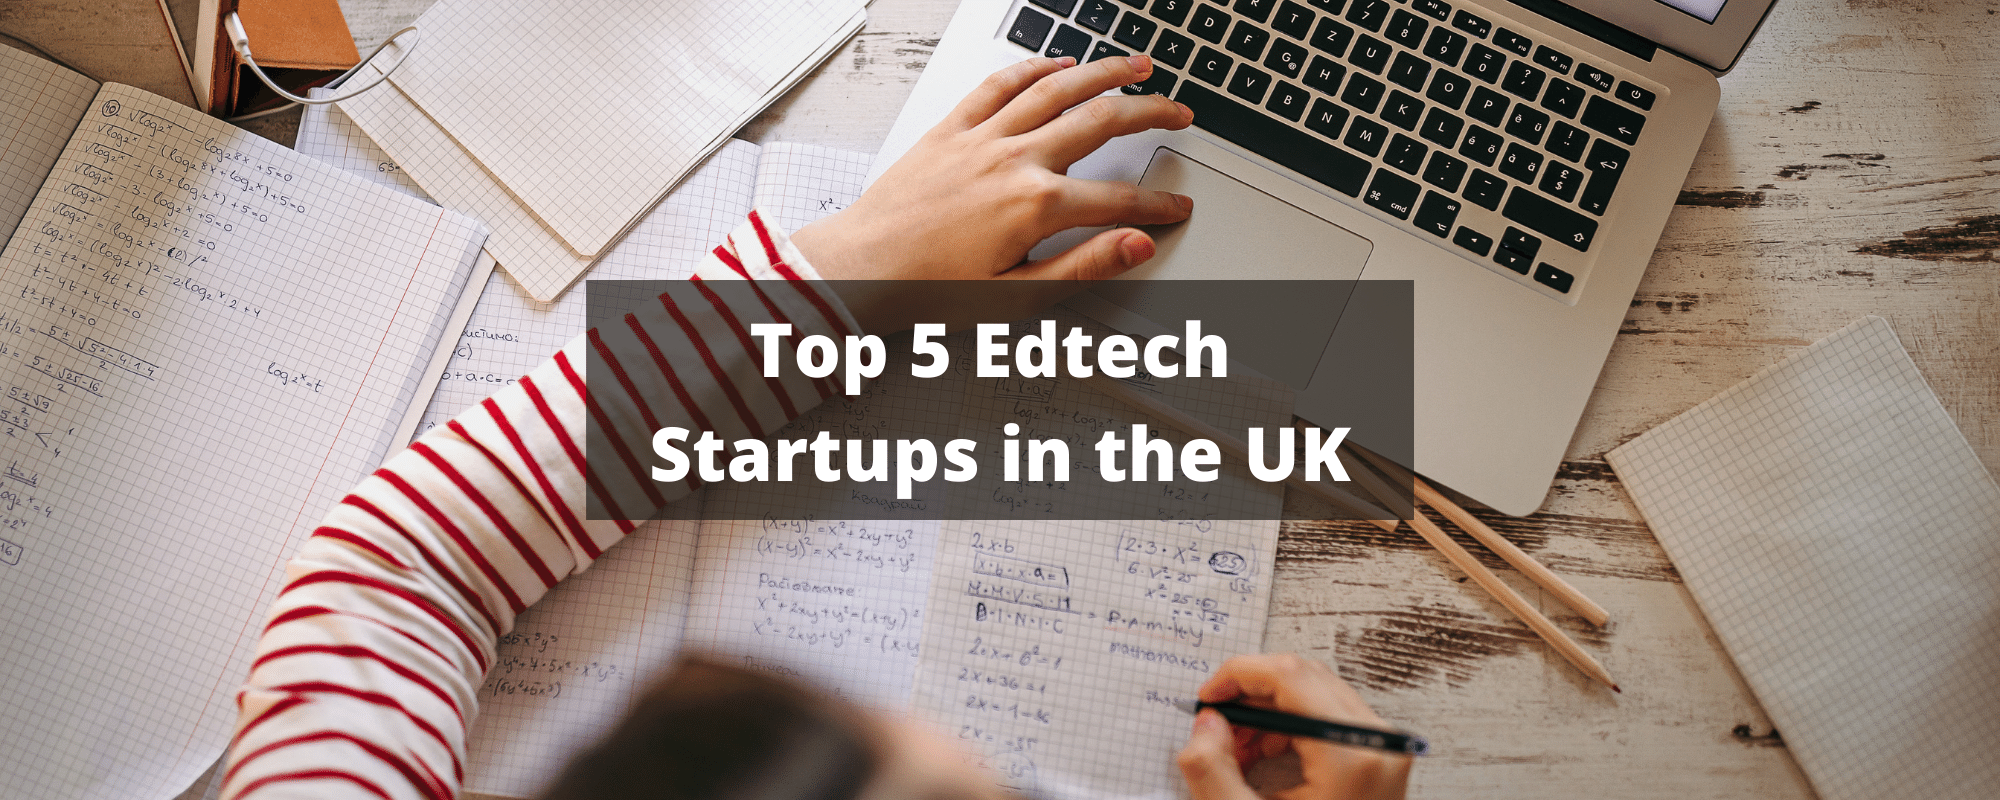 edtech startups in the UK